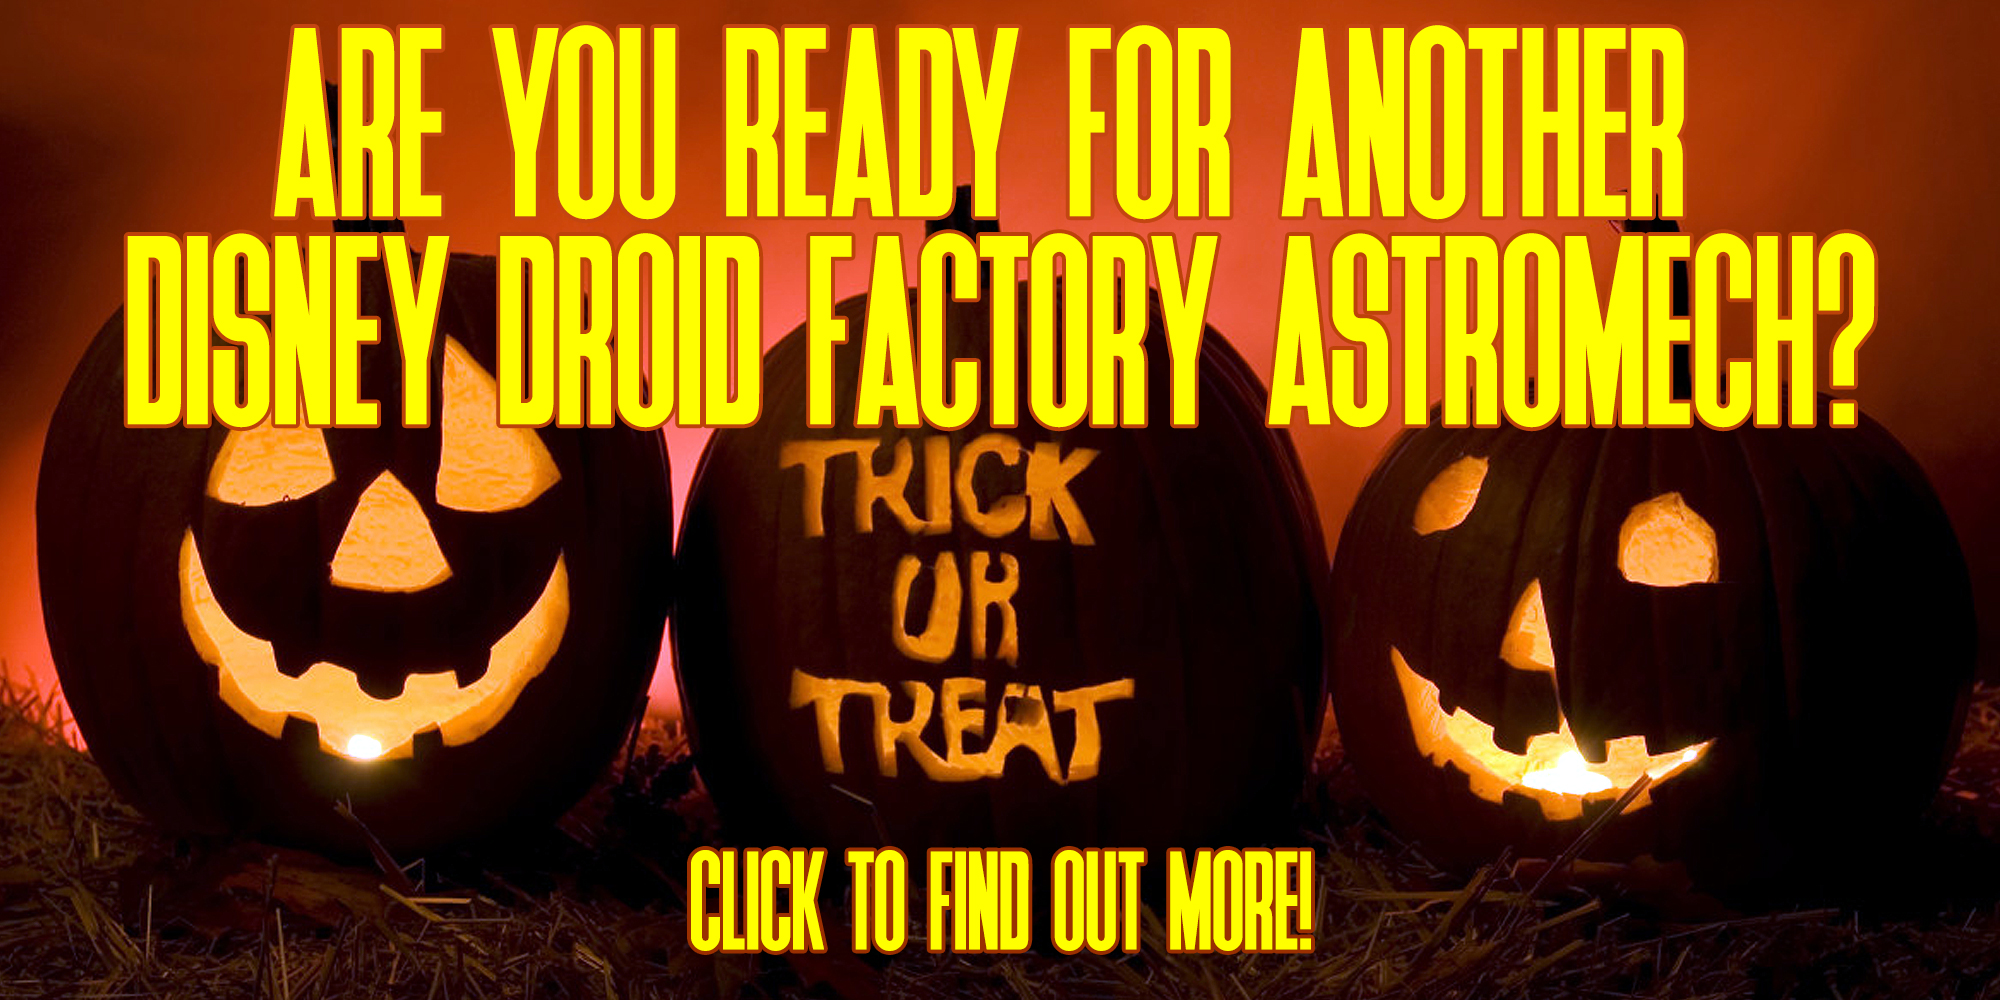 New Disney Droid Factory Halloween Astromech Droid Released!